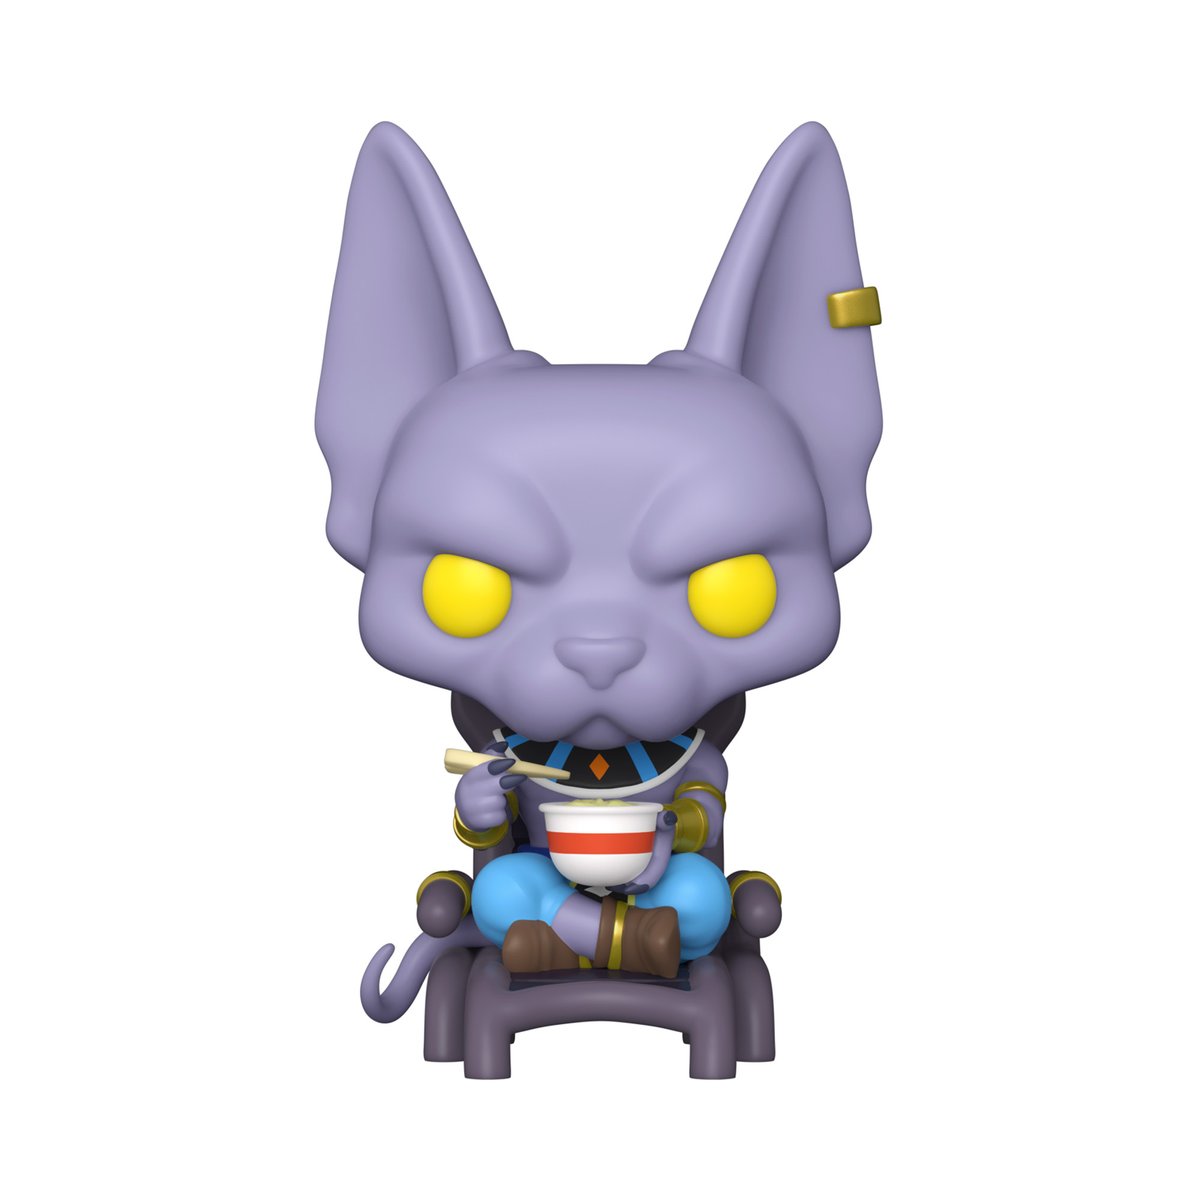 RT and follow @OriginalFunko for the chance to WIN the @HotTopic exclusive Dragonball Z - Beerus (Eating Noodles) POP! #Funko #FunkoPOP #Giveaway #DBZ @dragonballz